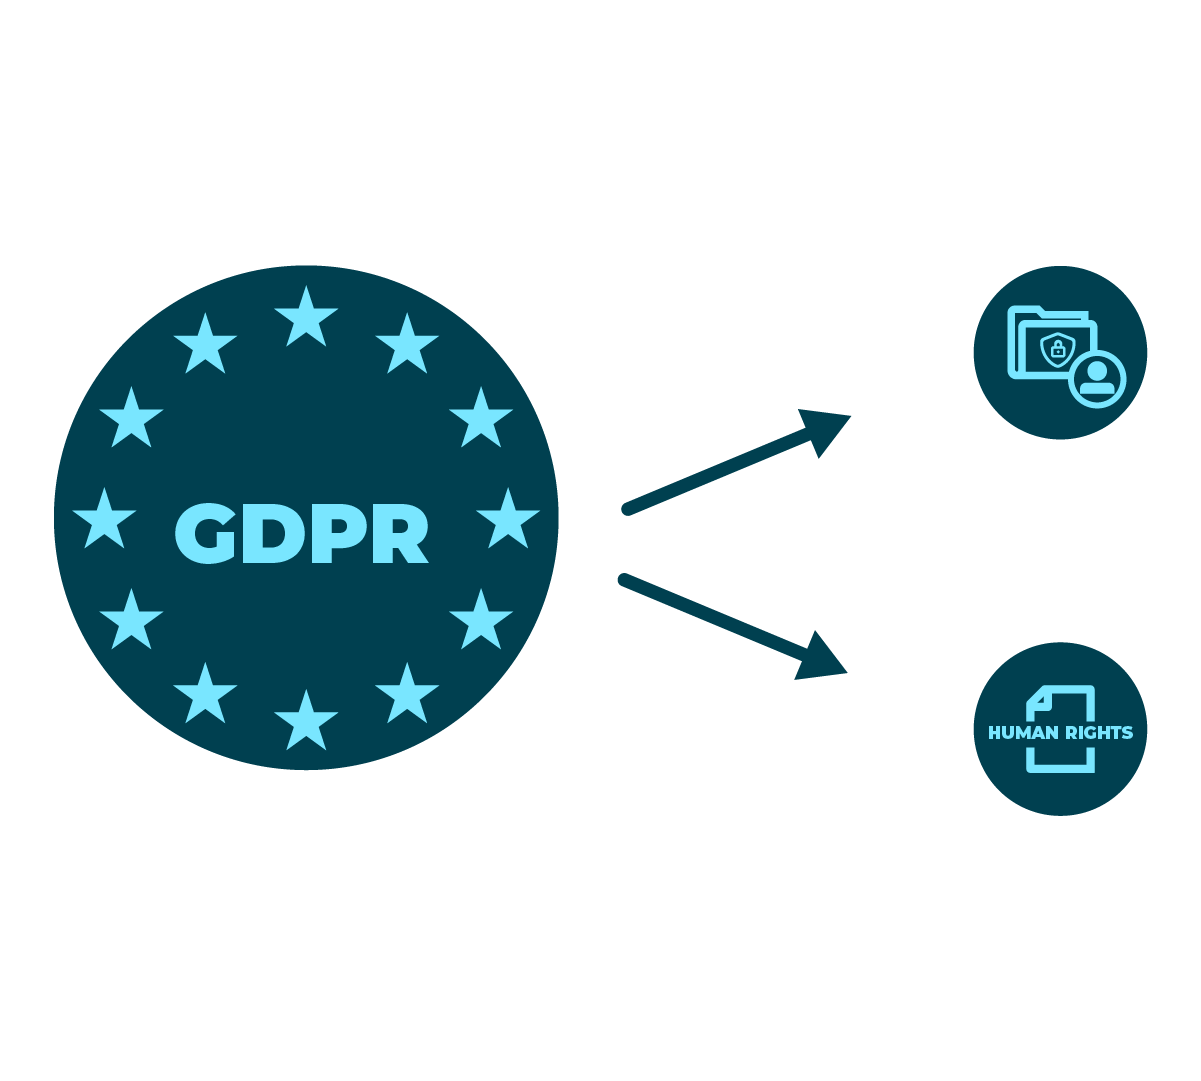 Decorative Image: Flow diagram showing GDPR, arrows pointing to id and human rights